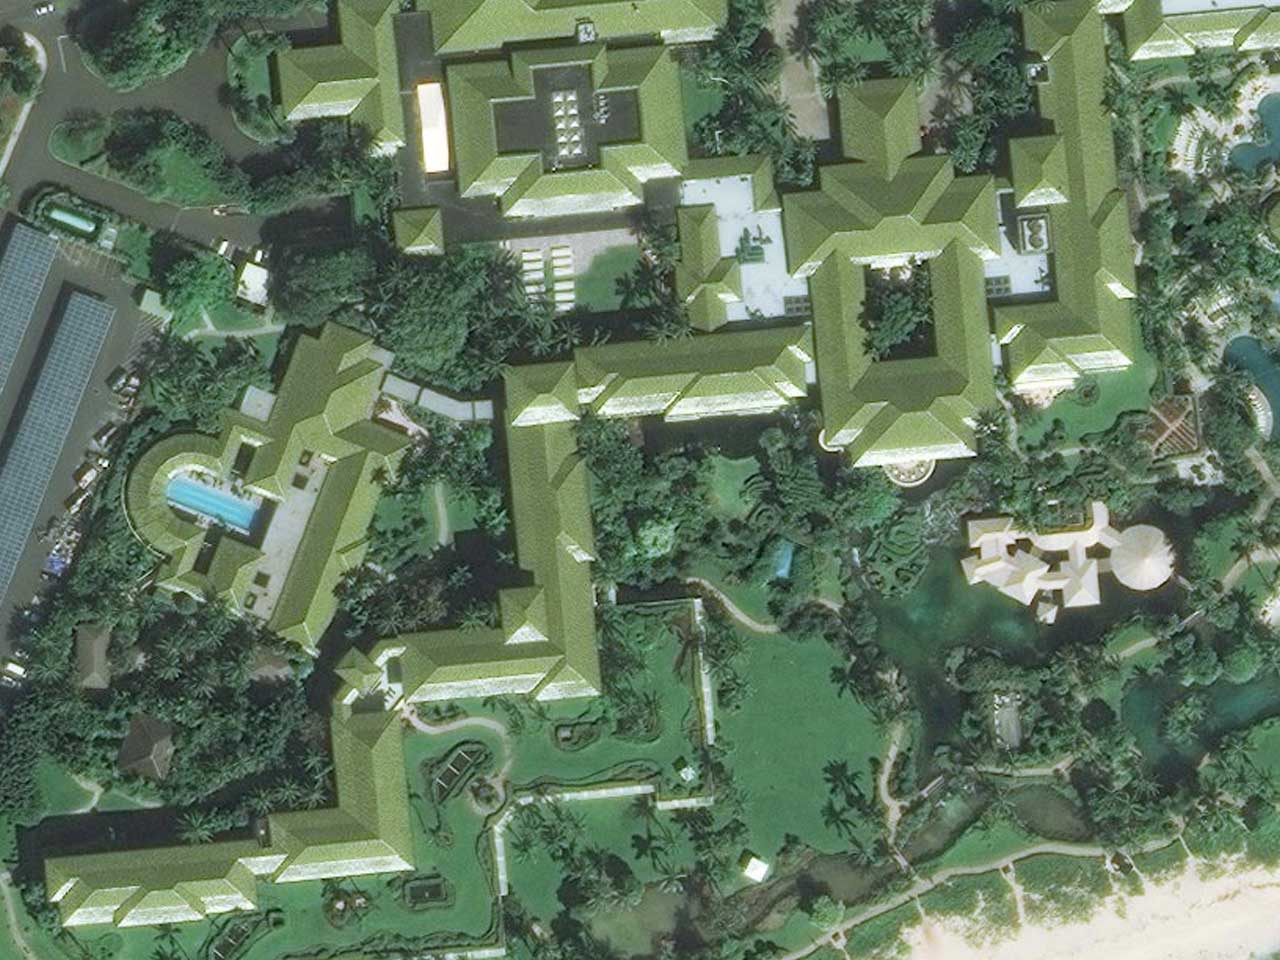 HIGH-RESOLUTION IMAGERY